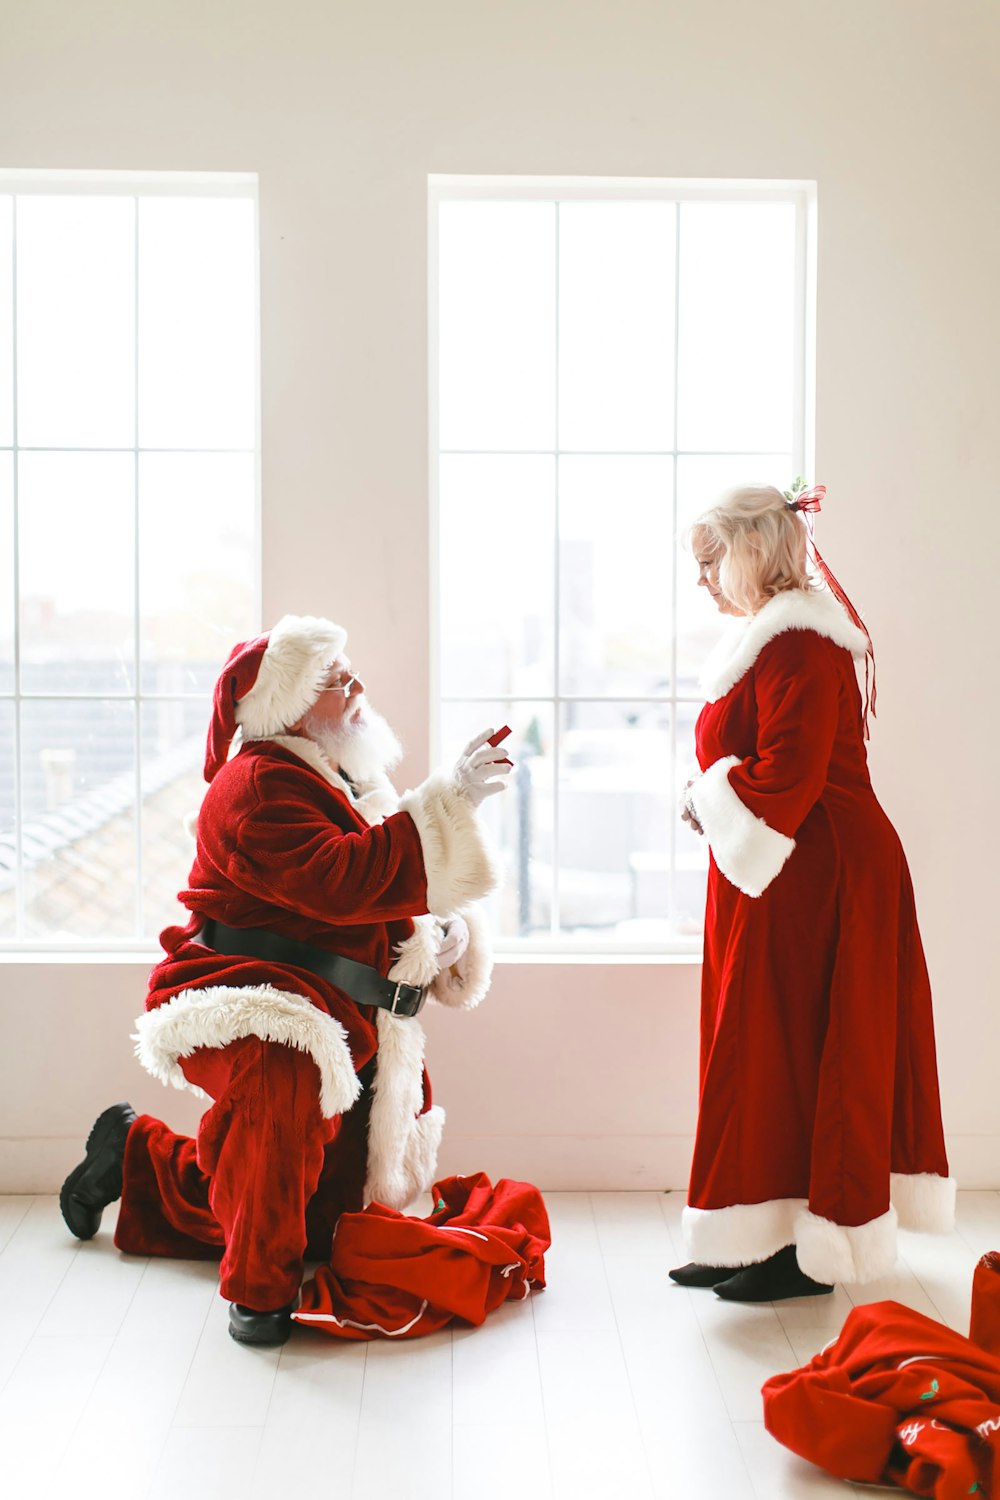 a little girl dressed as santa claus and a man dressed as santa claus